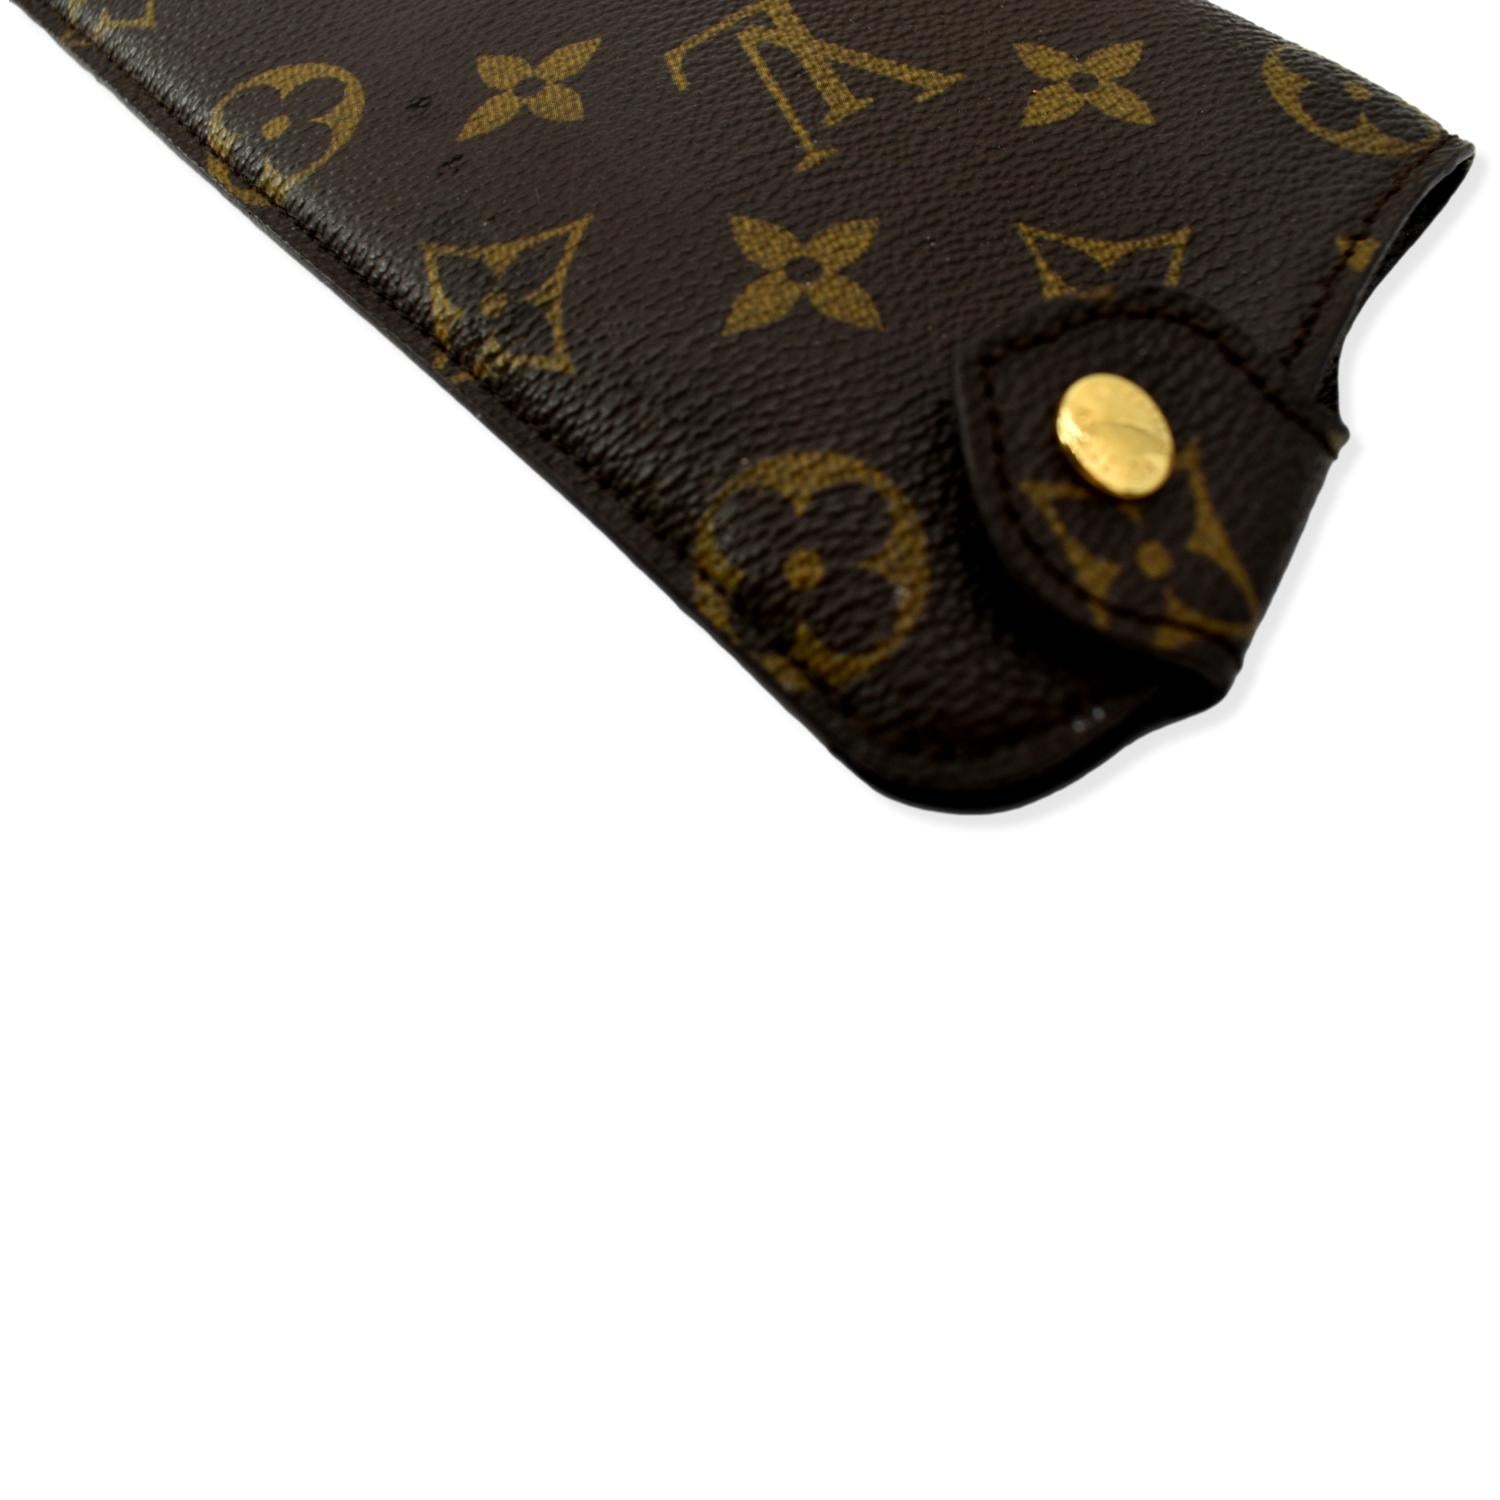 NEW LOUIS VUITTON SUNGLASSES CASE  DUSTCOVER  OUTER BOX 65 x 3 x 24   eBay